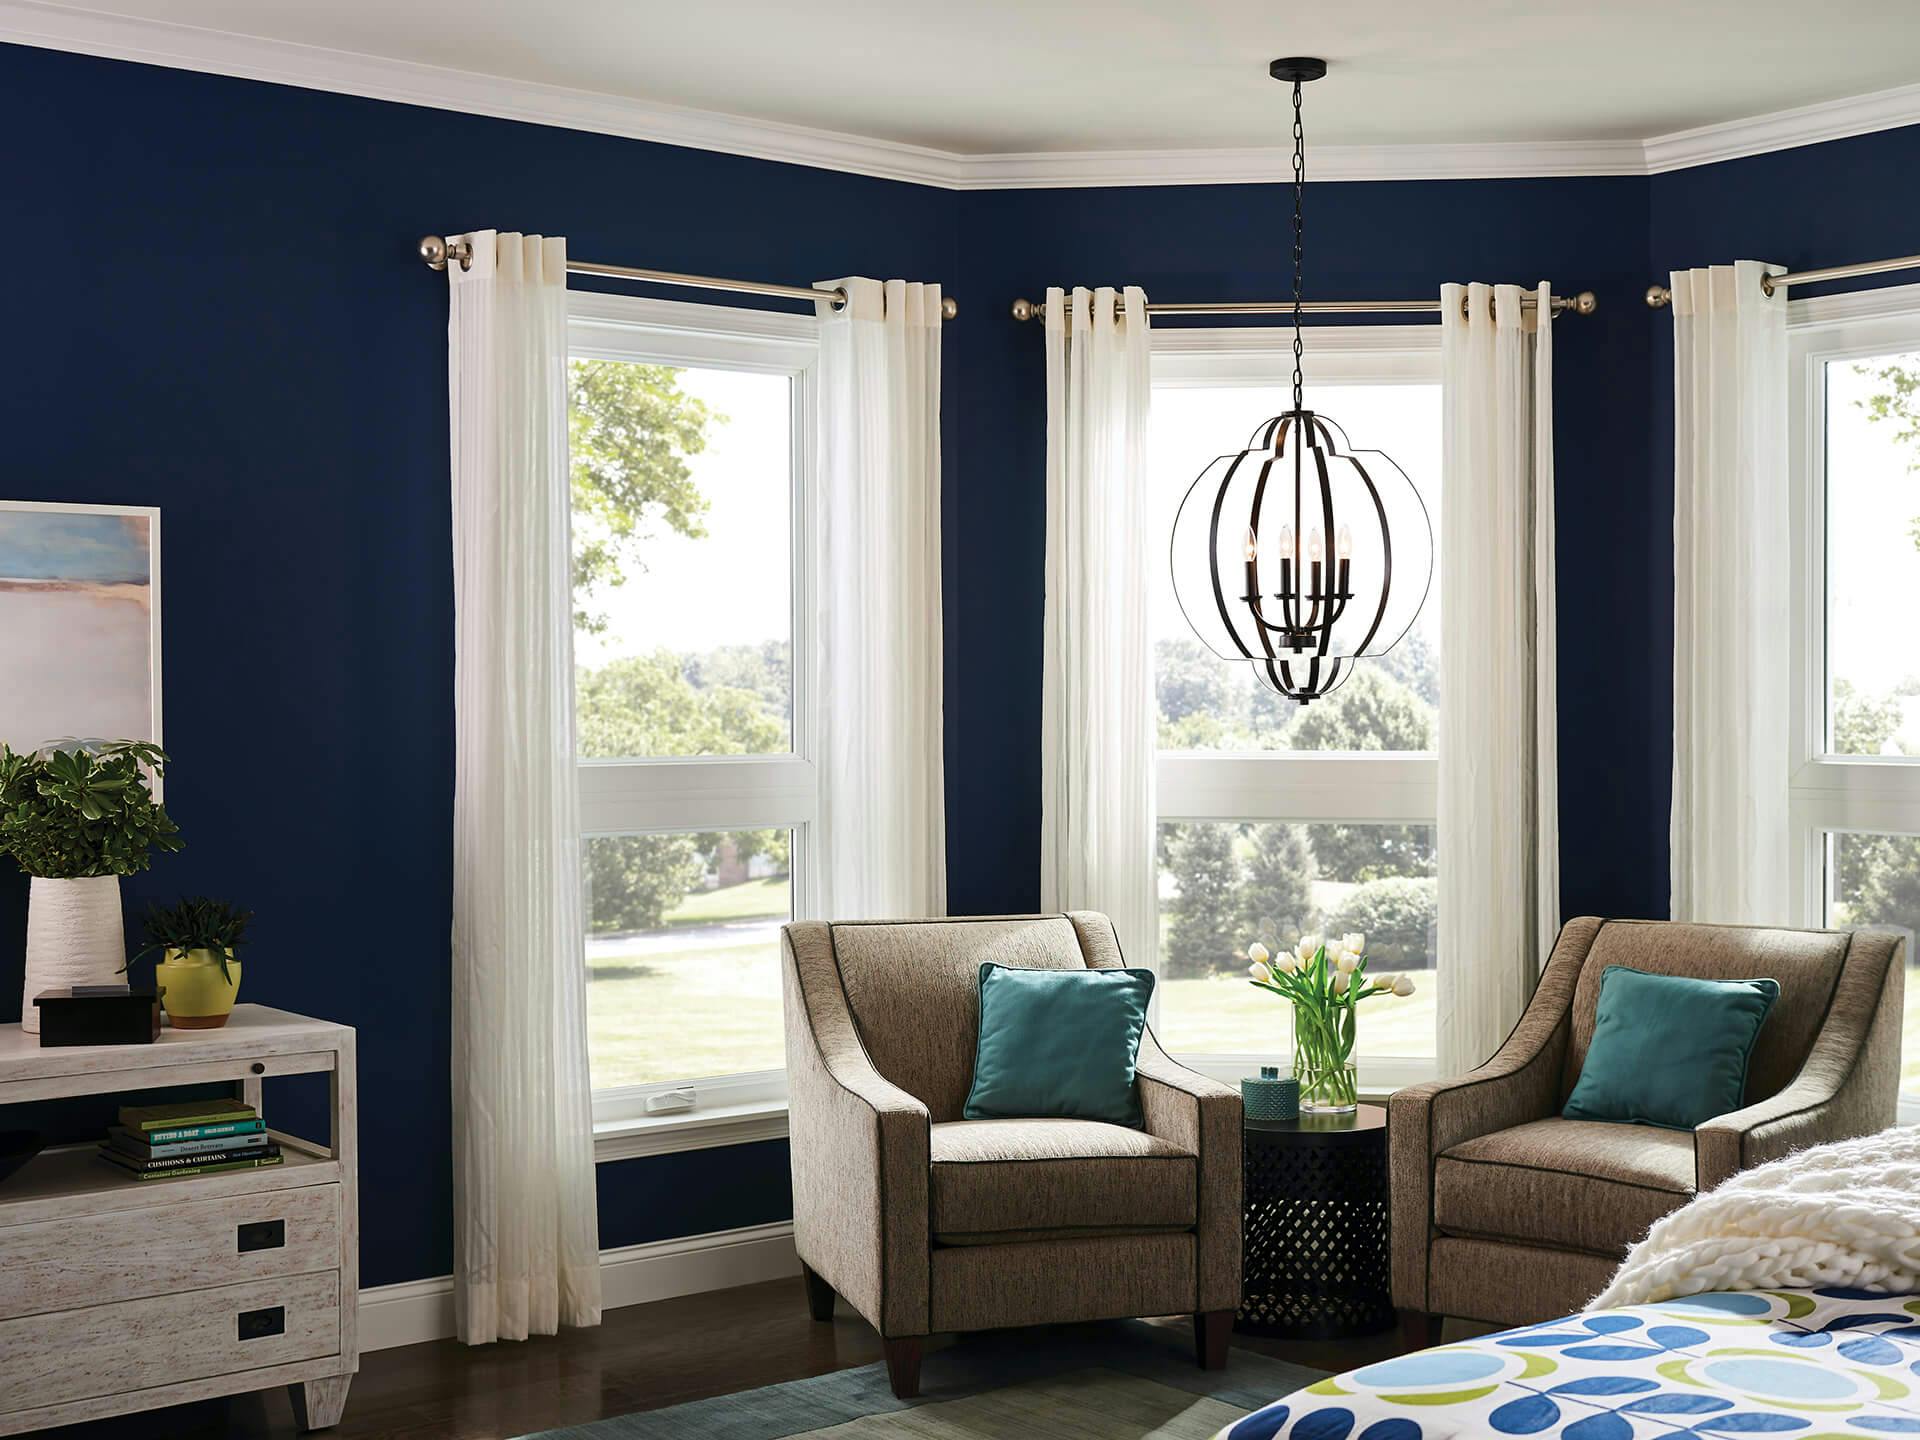 Bedroom with navy walls and three windows in the corner featuring a voleta pendant